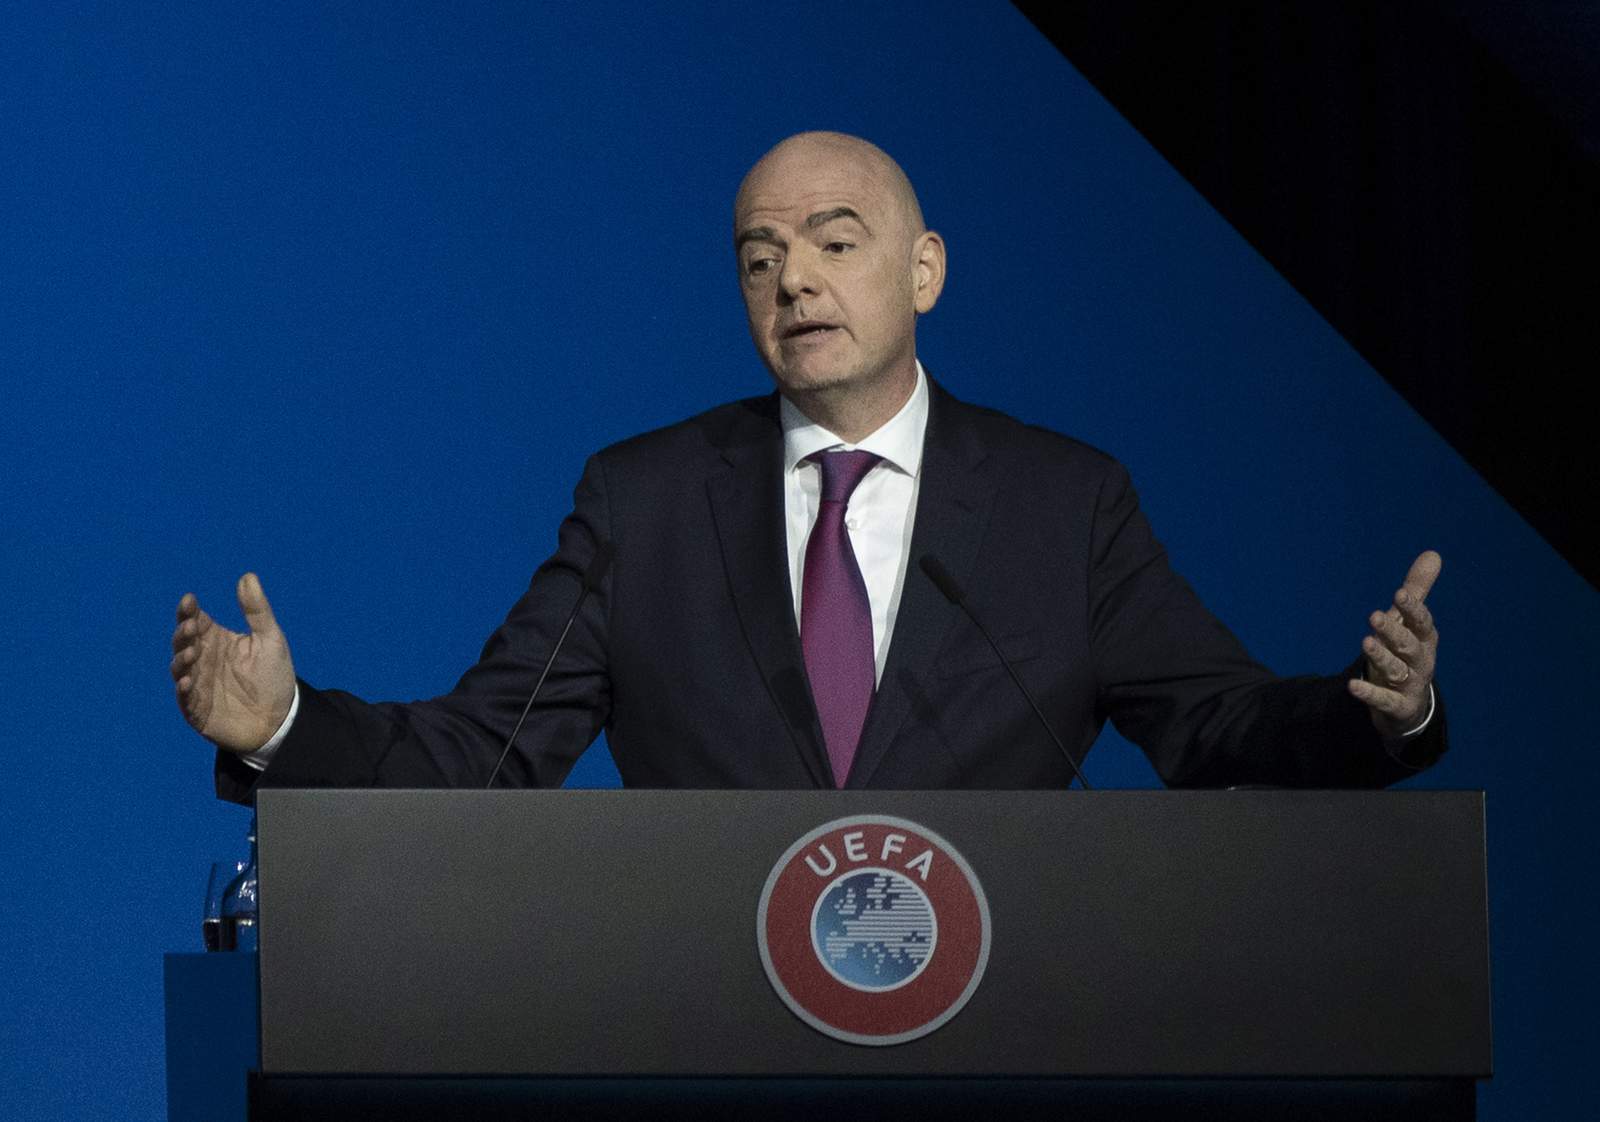 Infantino re-elected FIFA president, telling critics 'I love you all